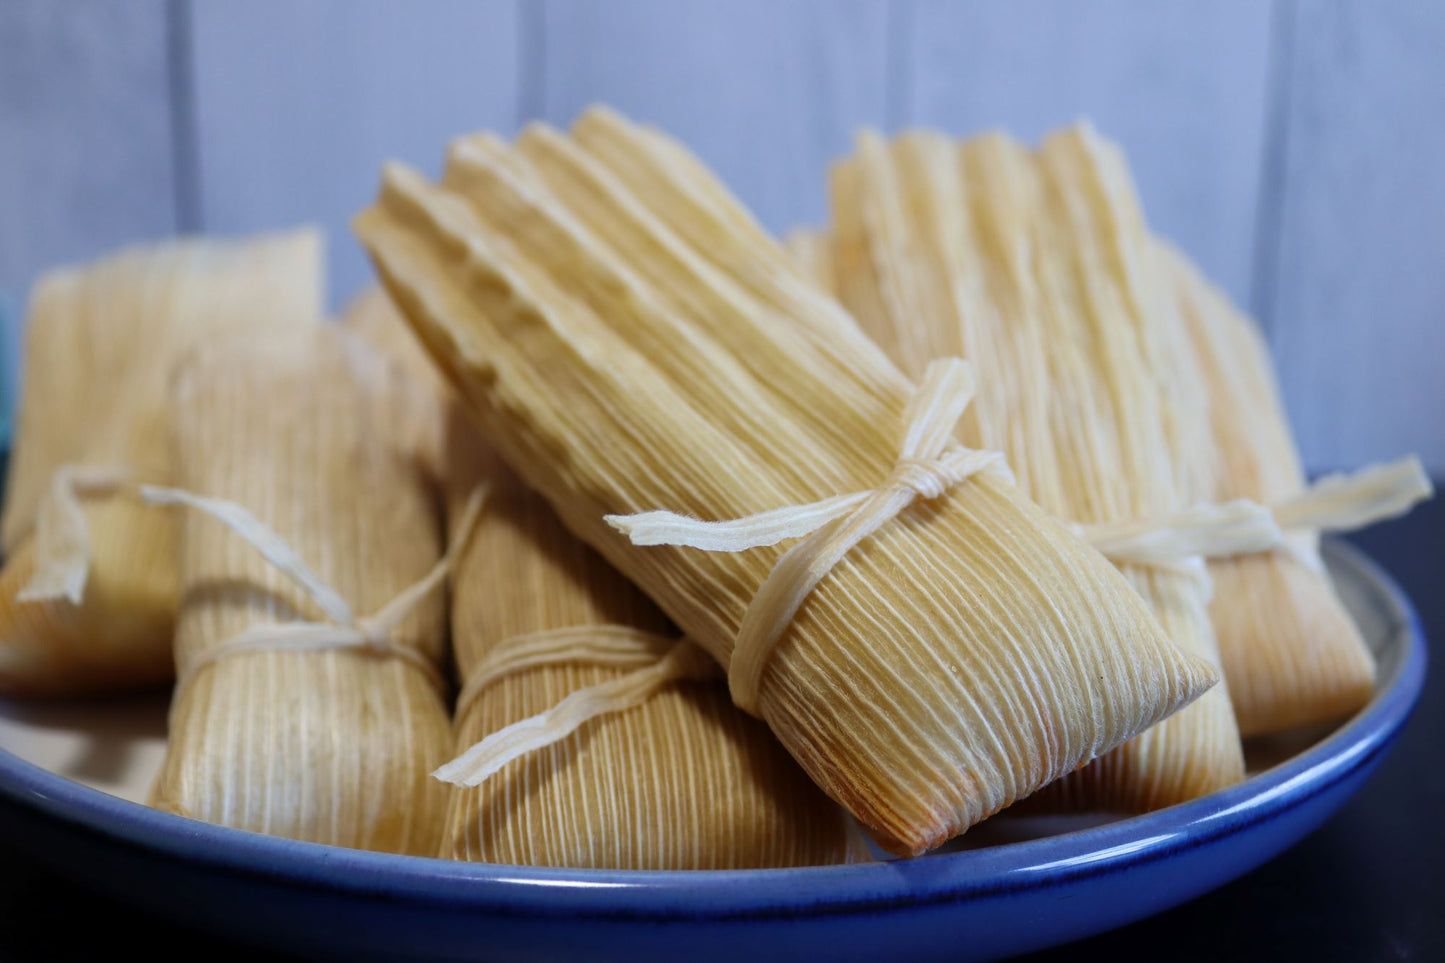 Sat, March 9: Tamale Time